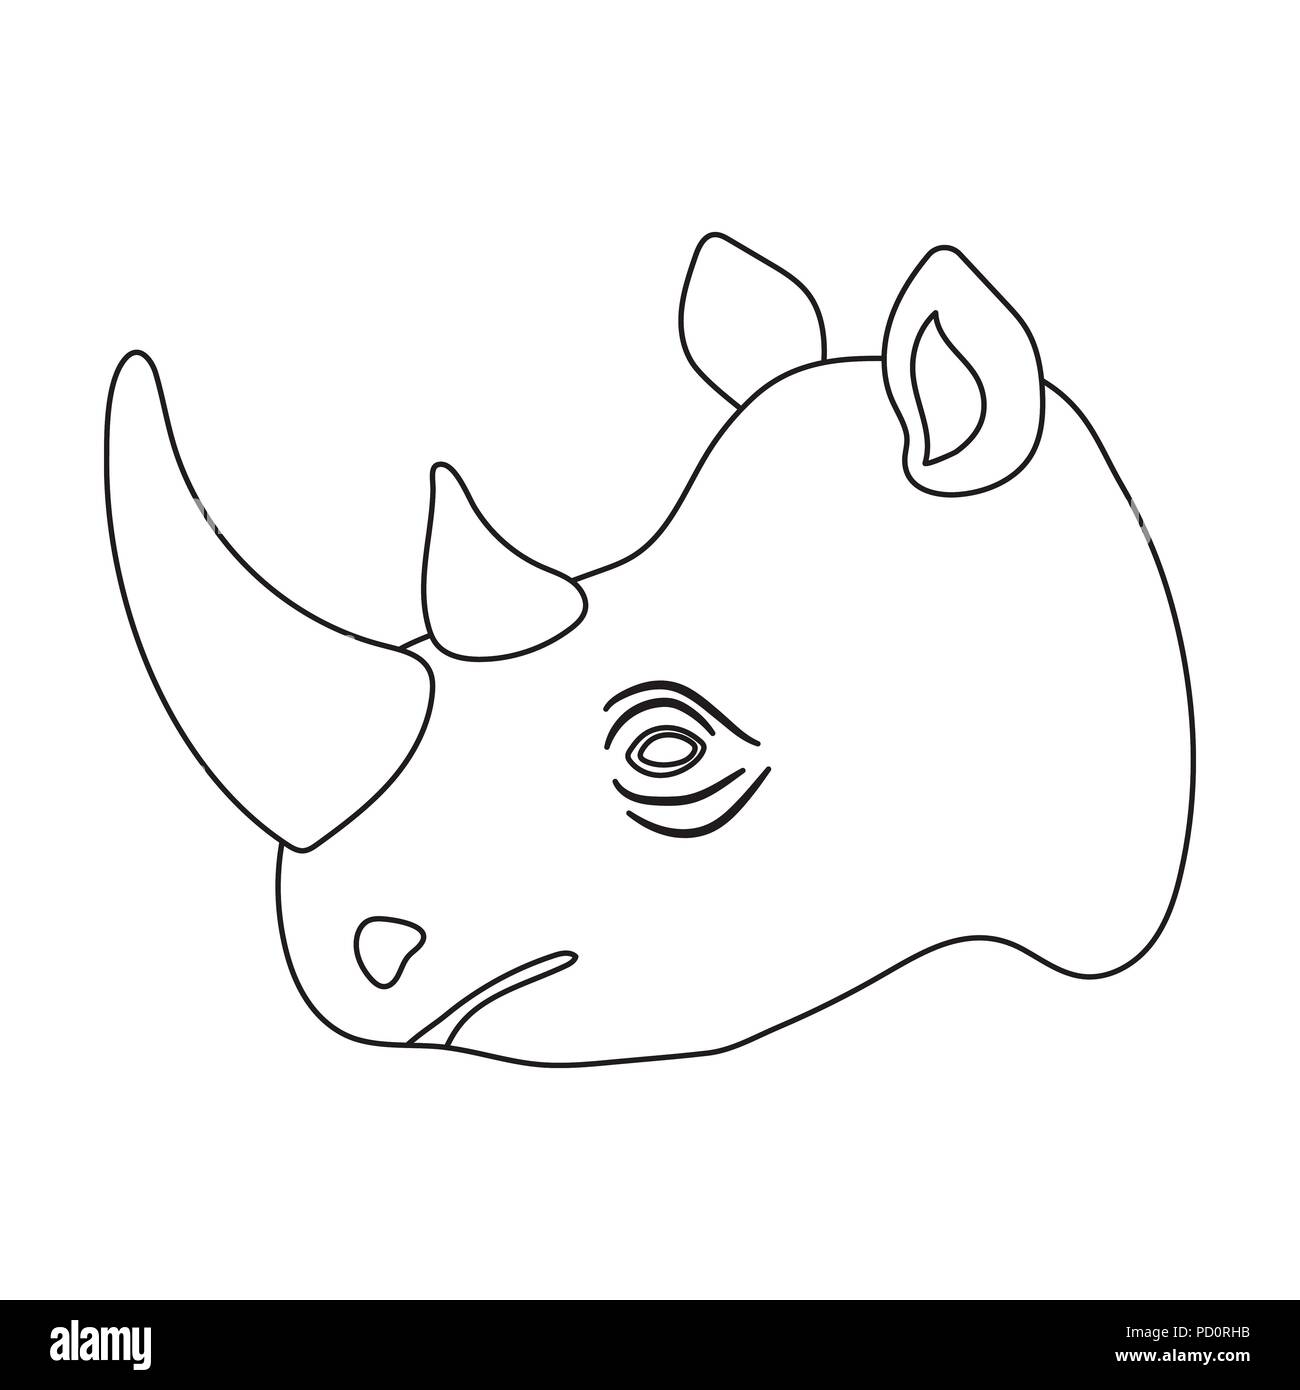 Rhinoceros icon in outline design isolated on white background. Realistic animals symbol stock vector illustration. Stock Vector